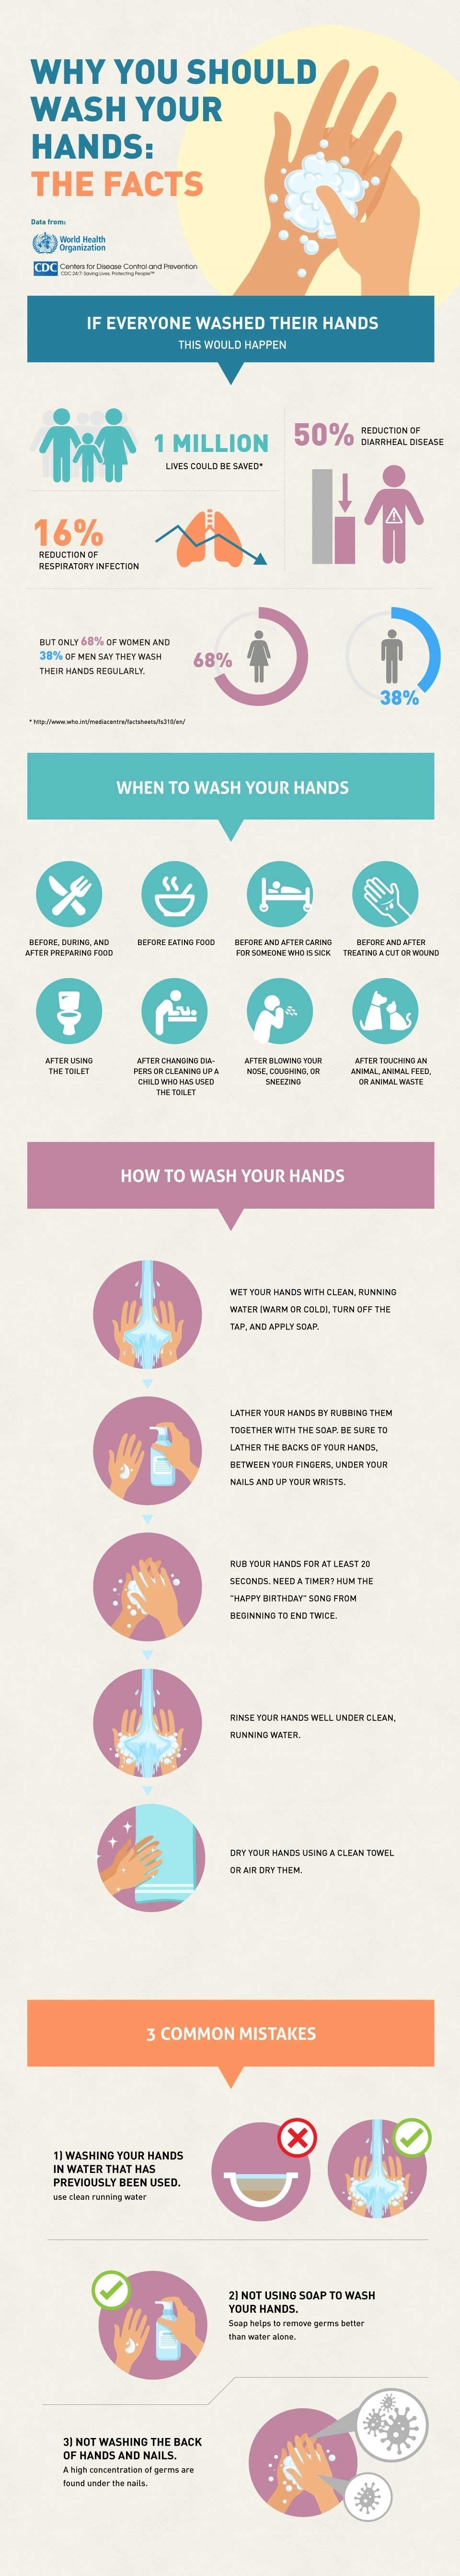 Infographic: Handwashing is Key to Flu Prevention